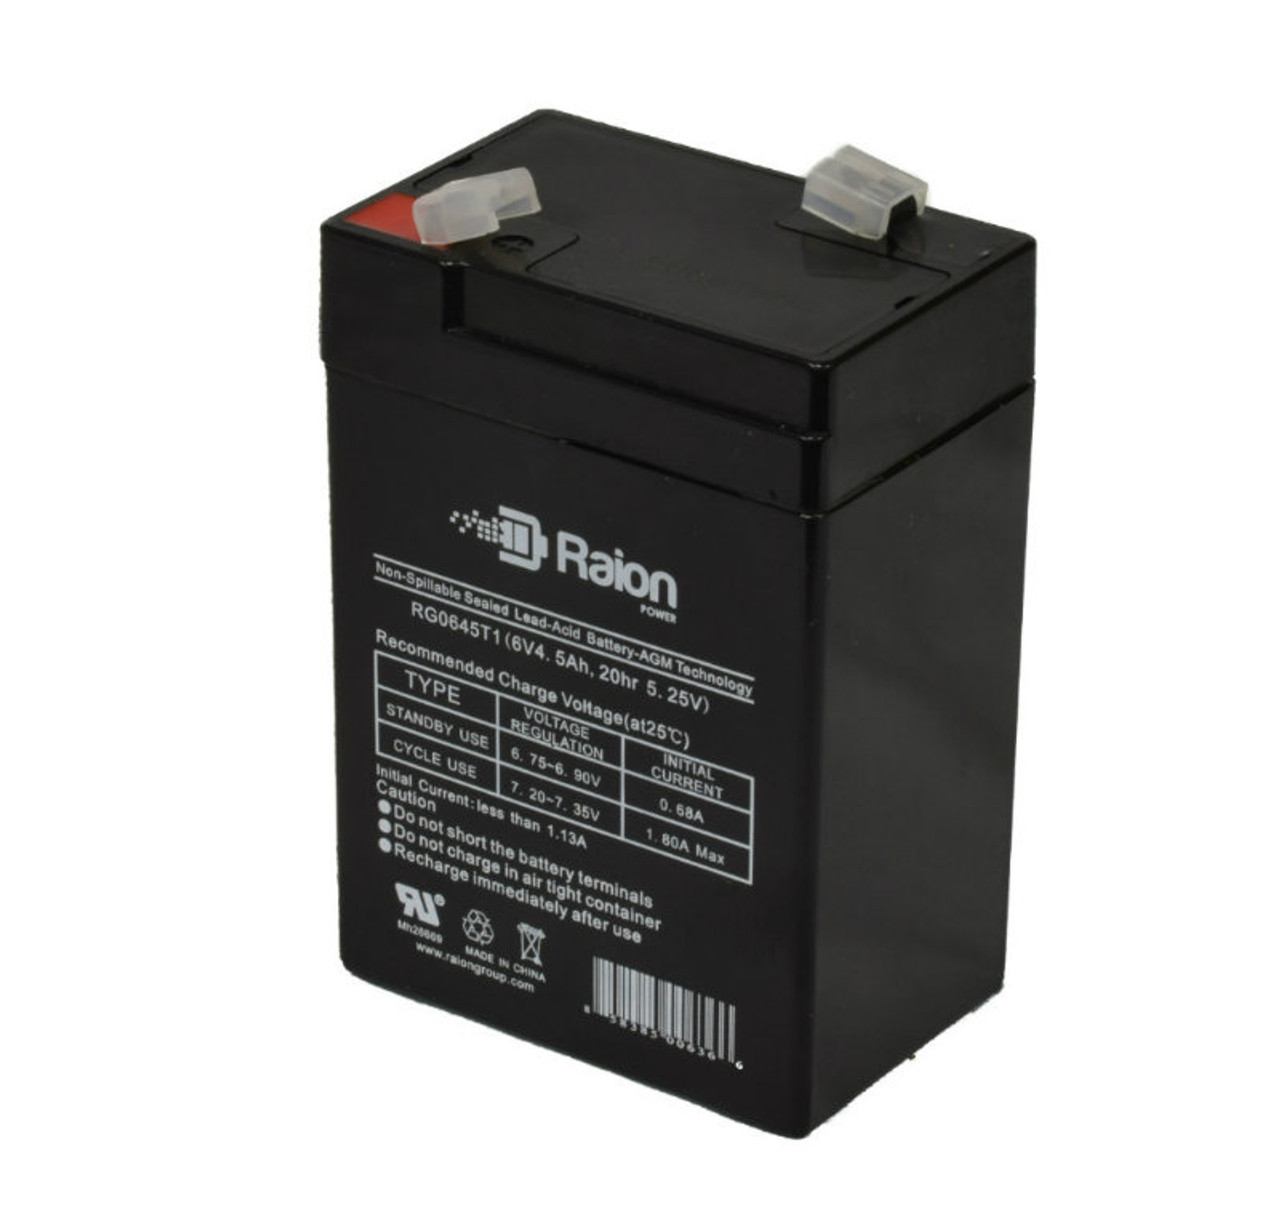 Raion Power RG0645T1 6V 4.5Ah Replacement Battery Cartridge for SES BT5-6